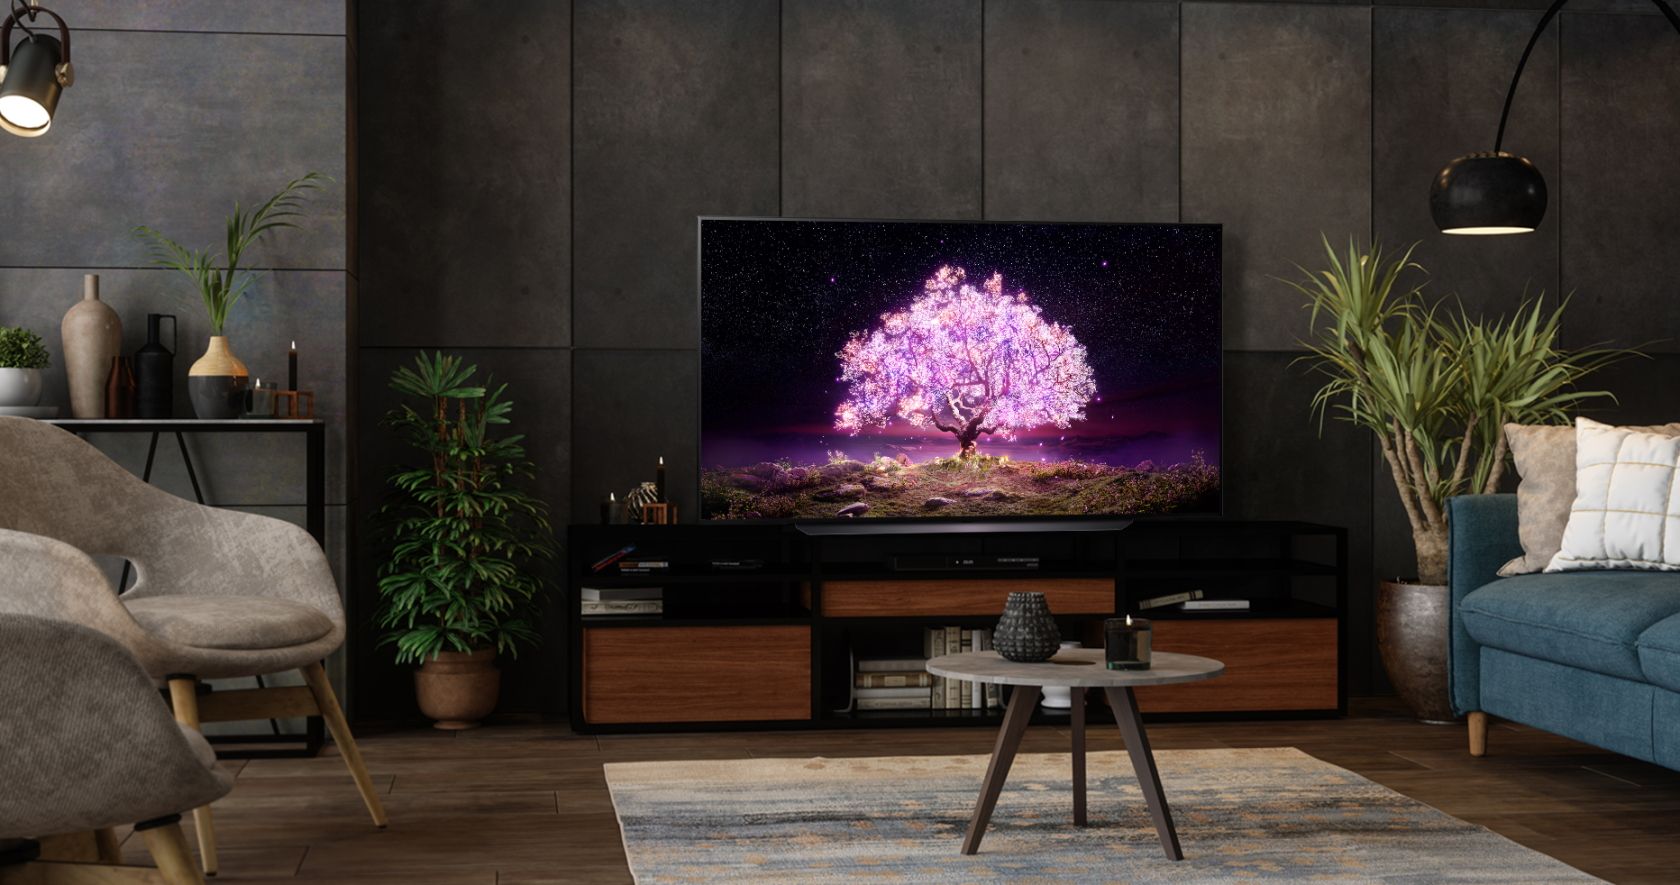 LG C1 OLED TV in the living room